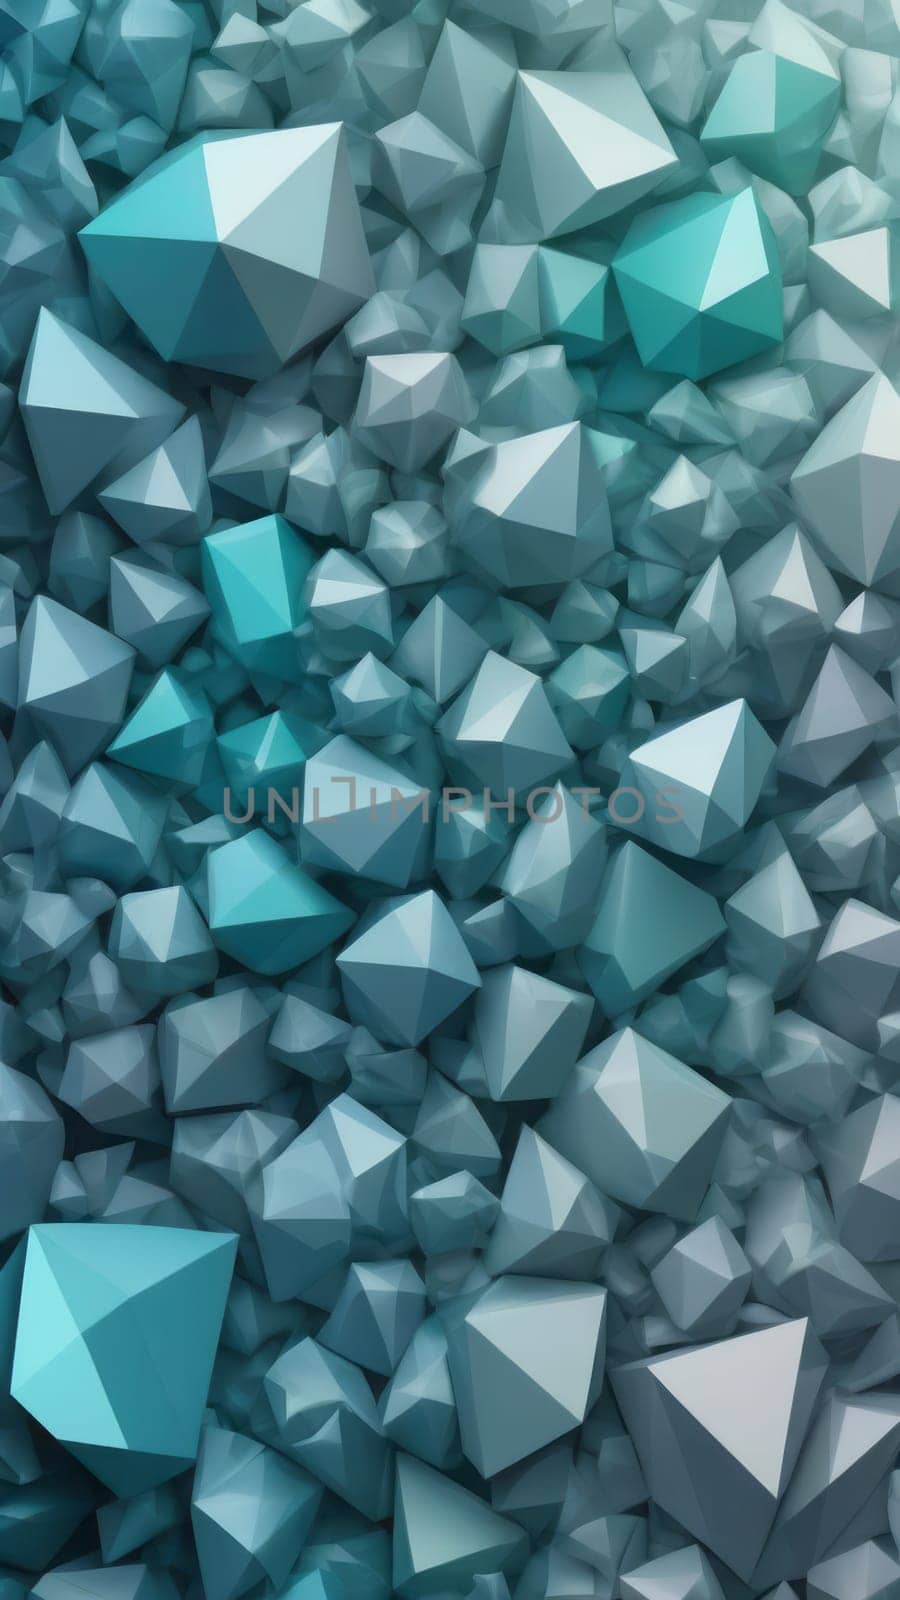 Art for inspiration from Crystalline shapes and gray by nkotlyar